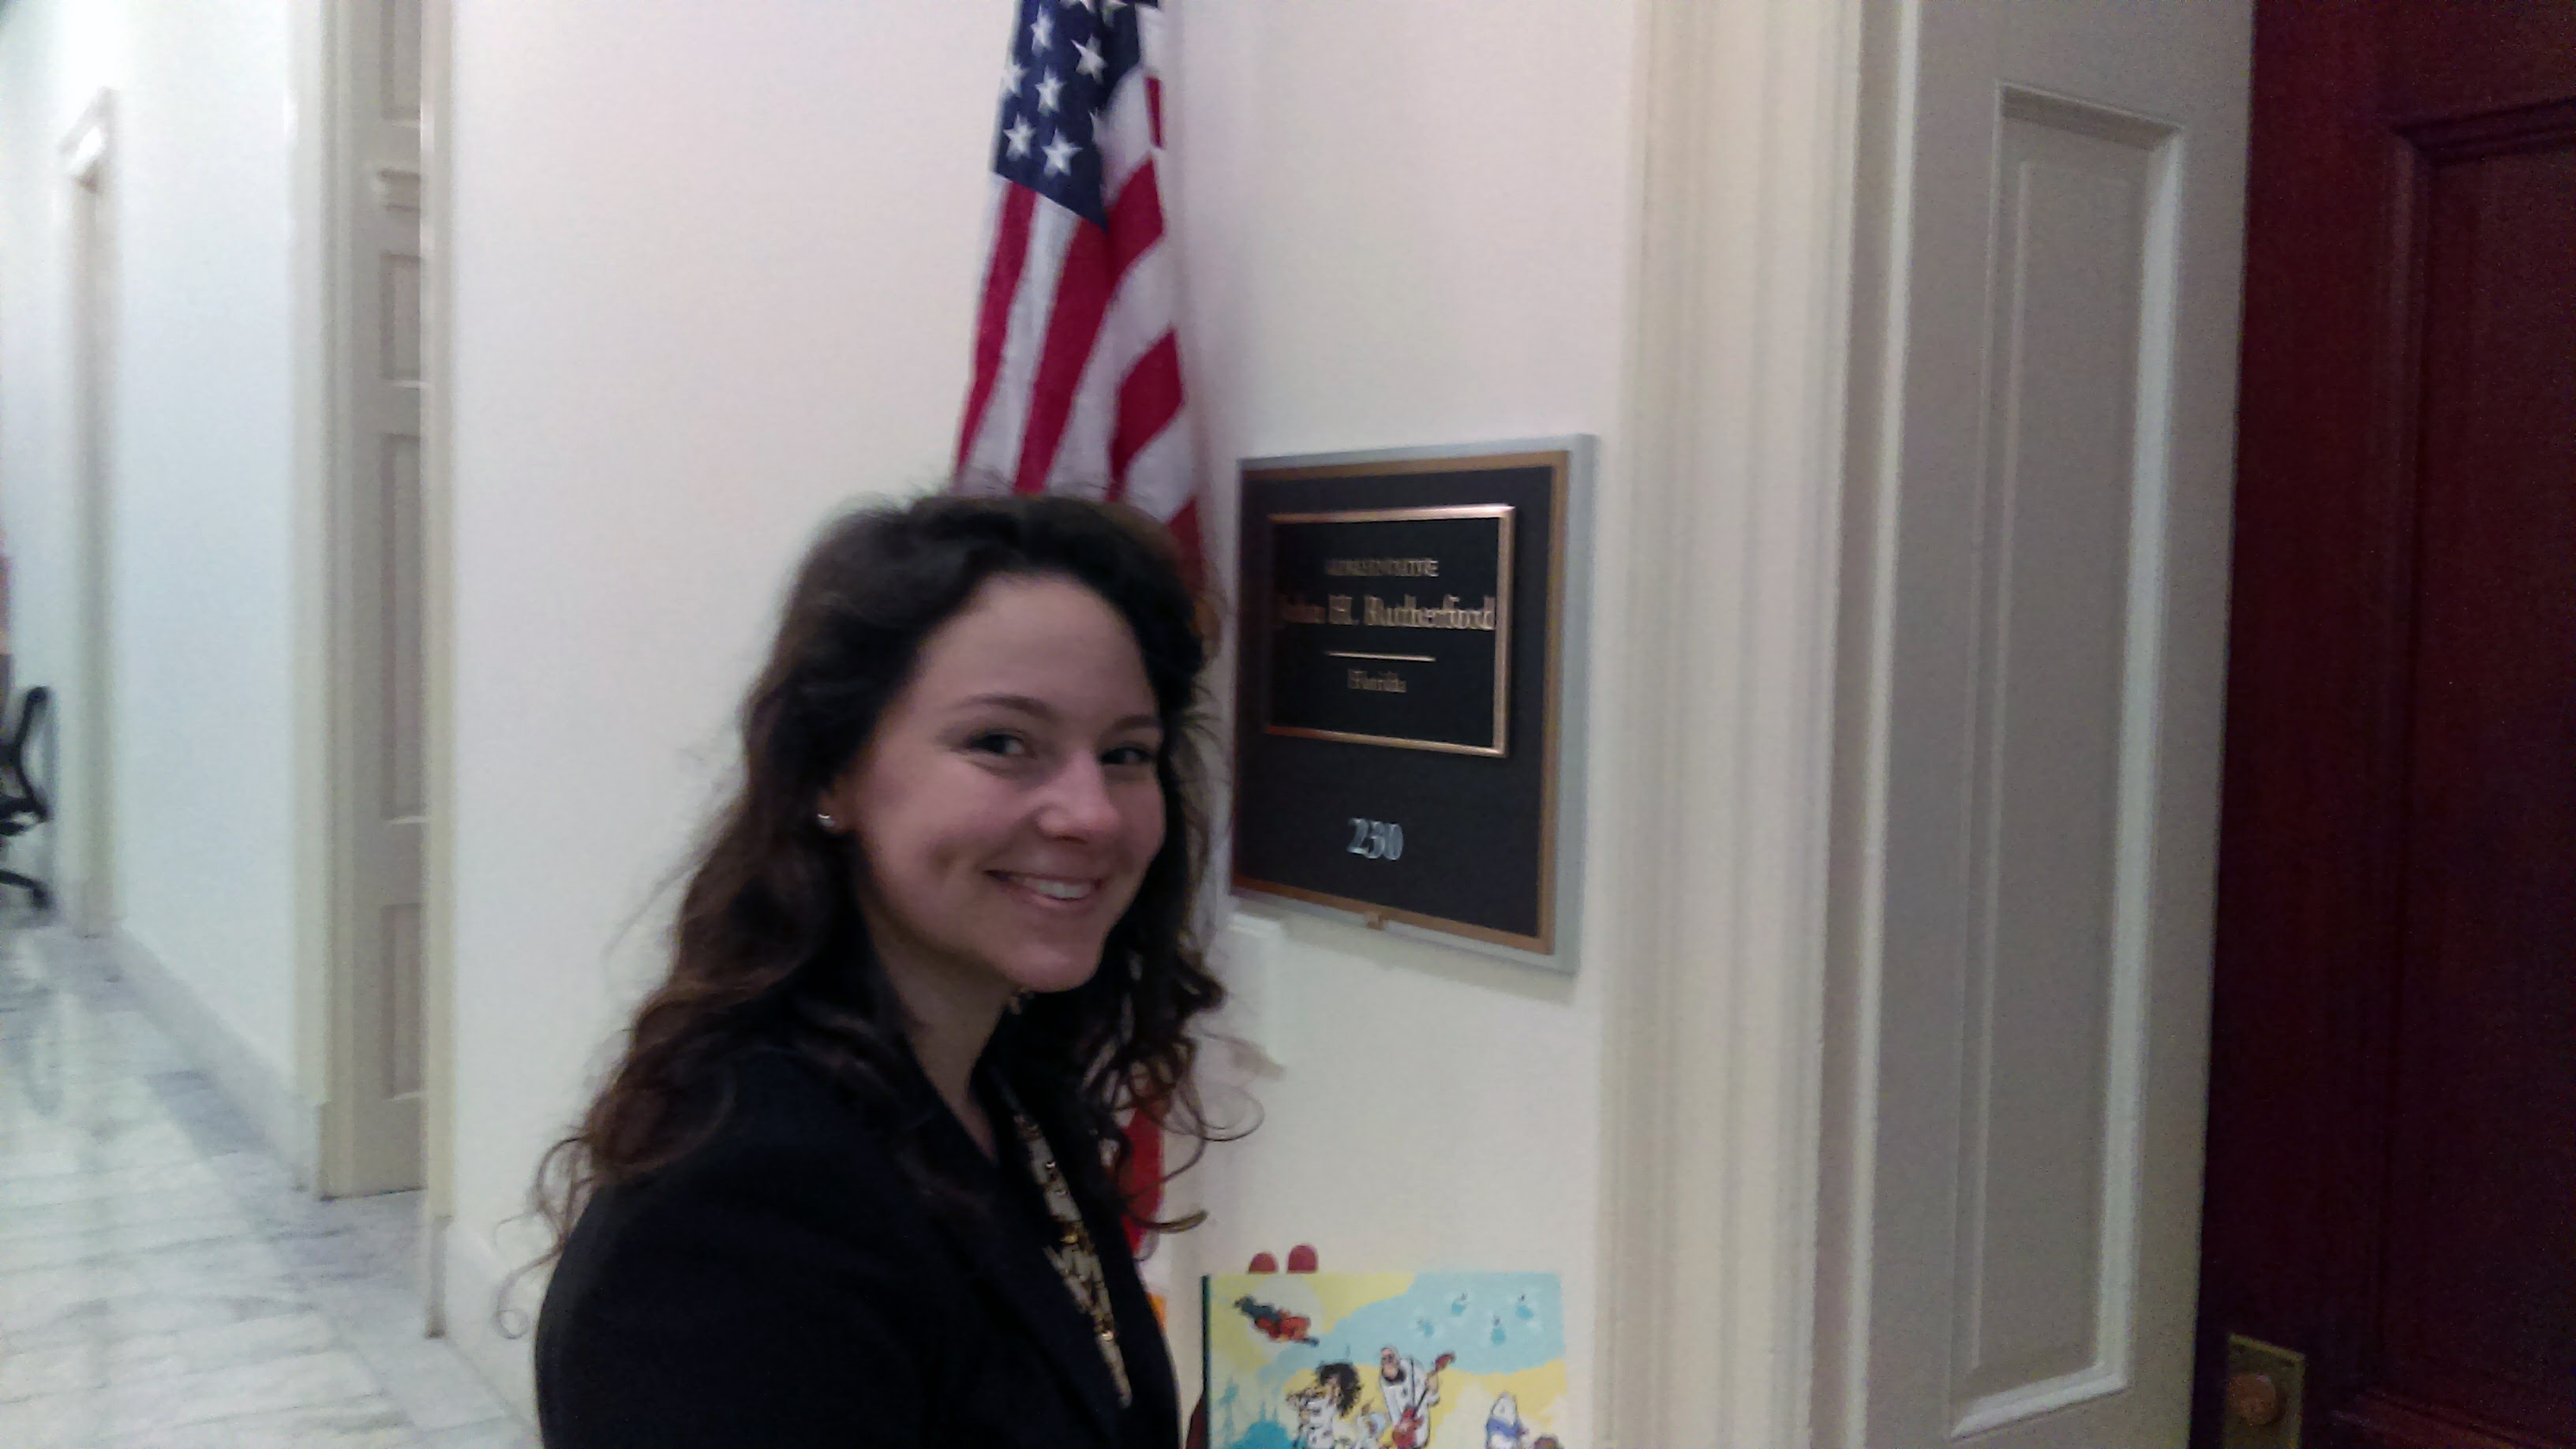 Katharine Sucher at Rep. Rutherford's office | Island Press